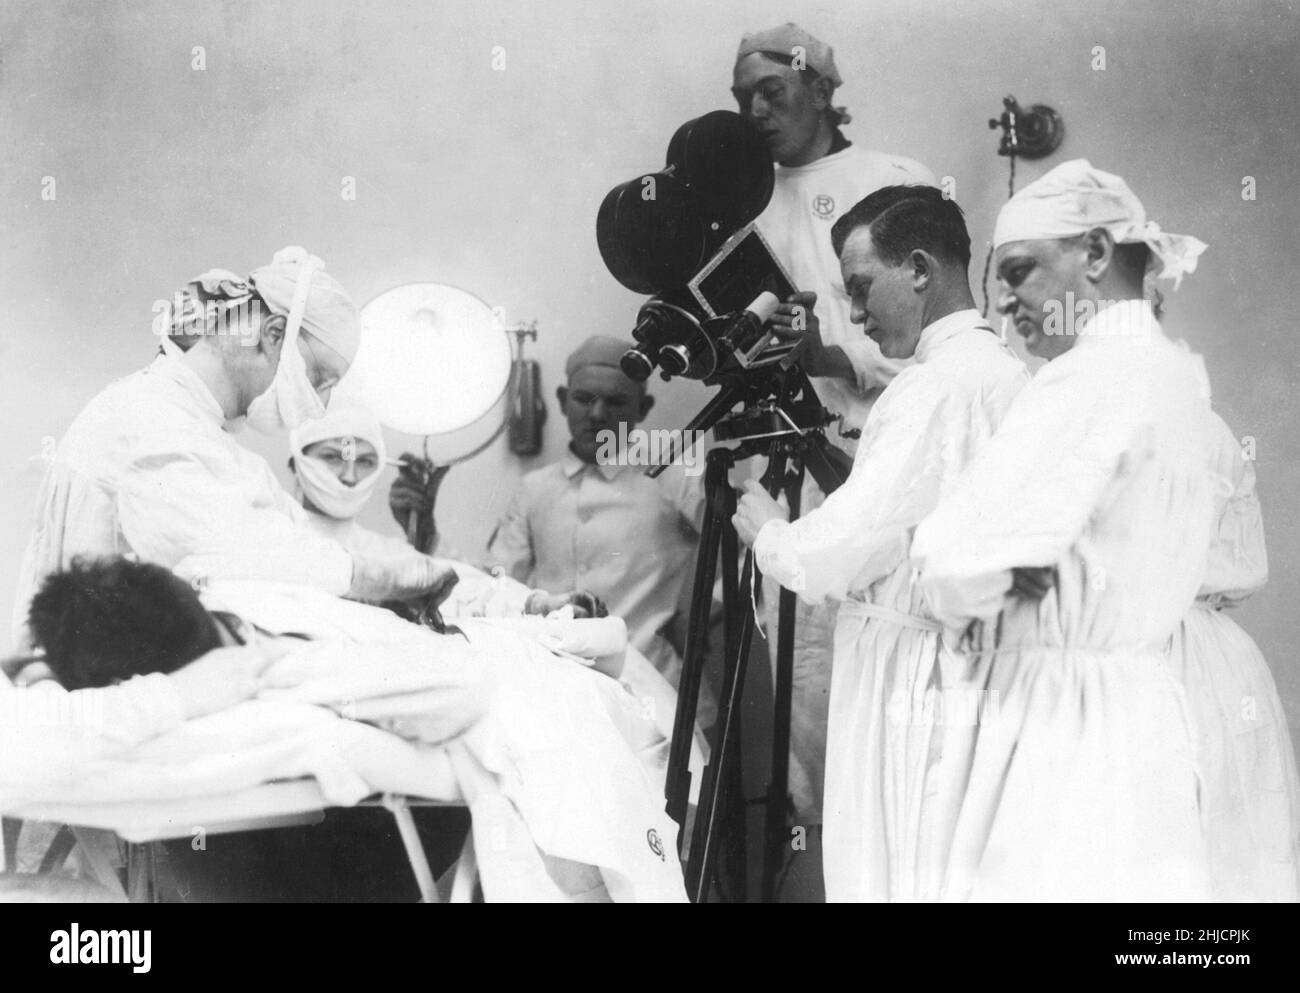 Filming a hernia operation at Walter Reed Hospital, 1918, during World ...